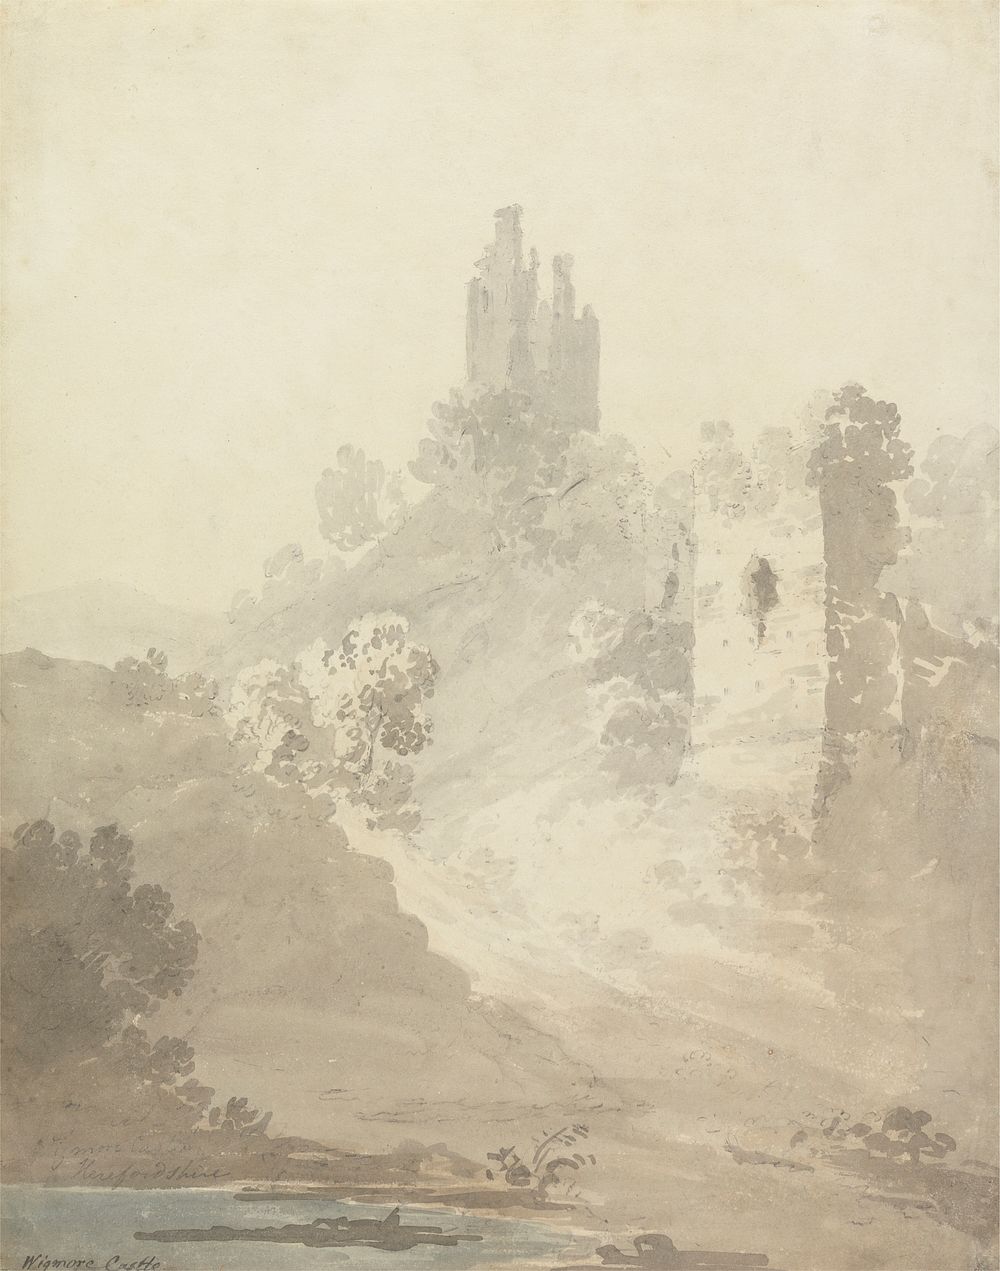 Wigmore Castle, Herefordshire by William Alexander